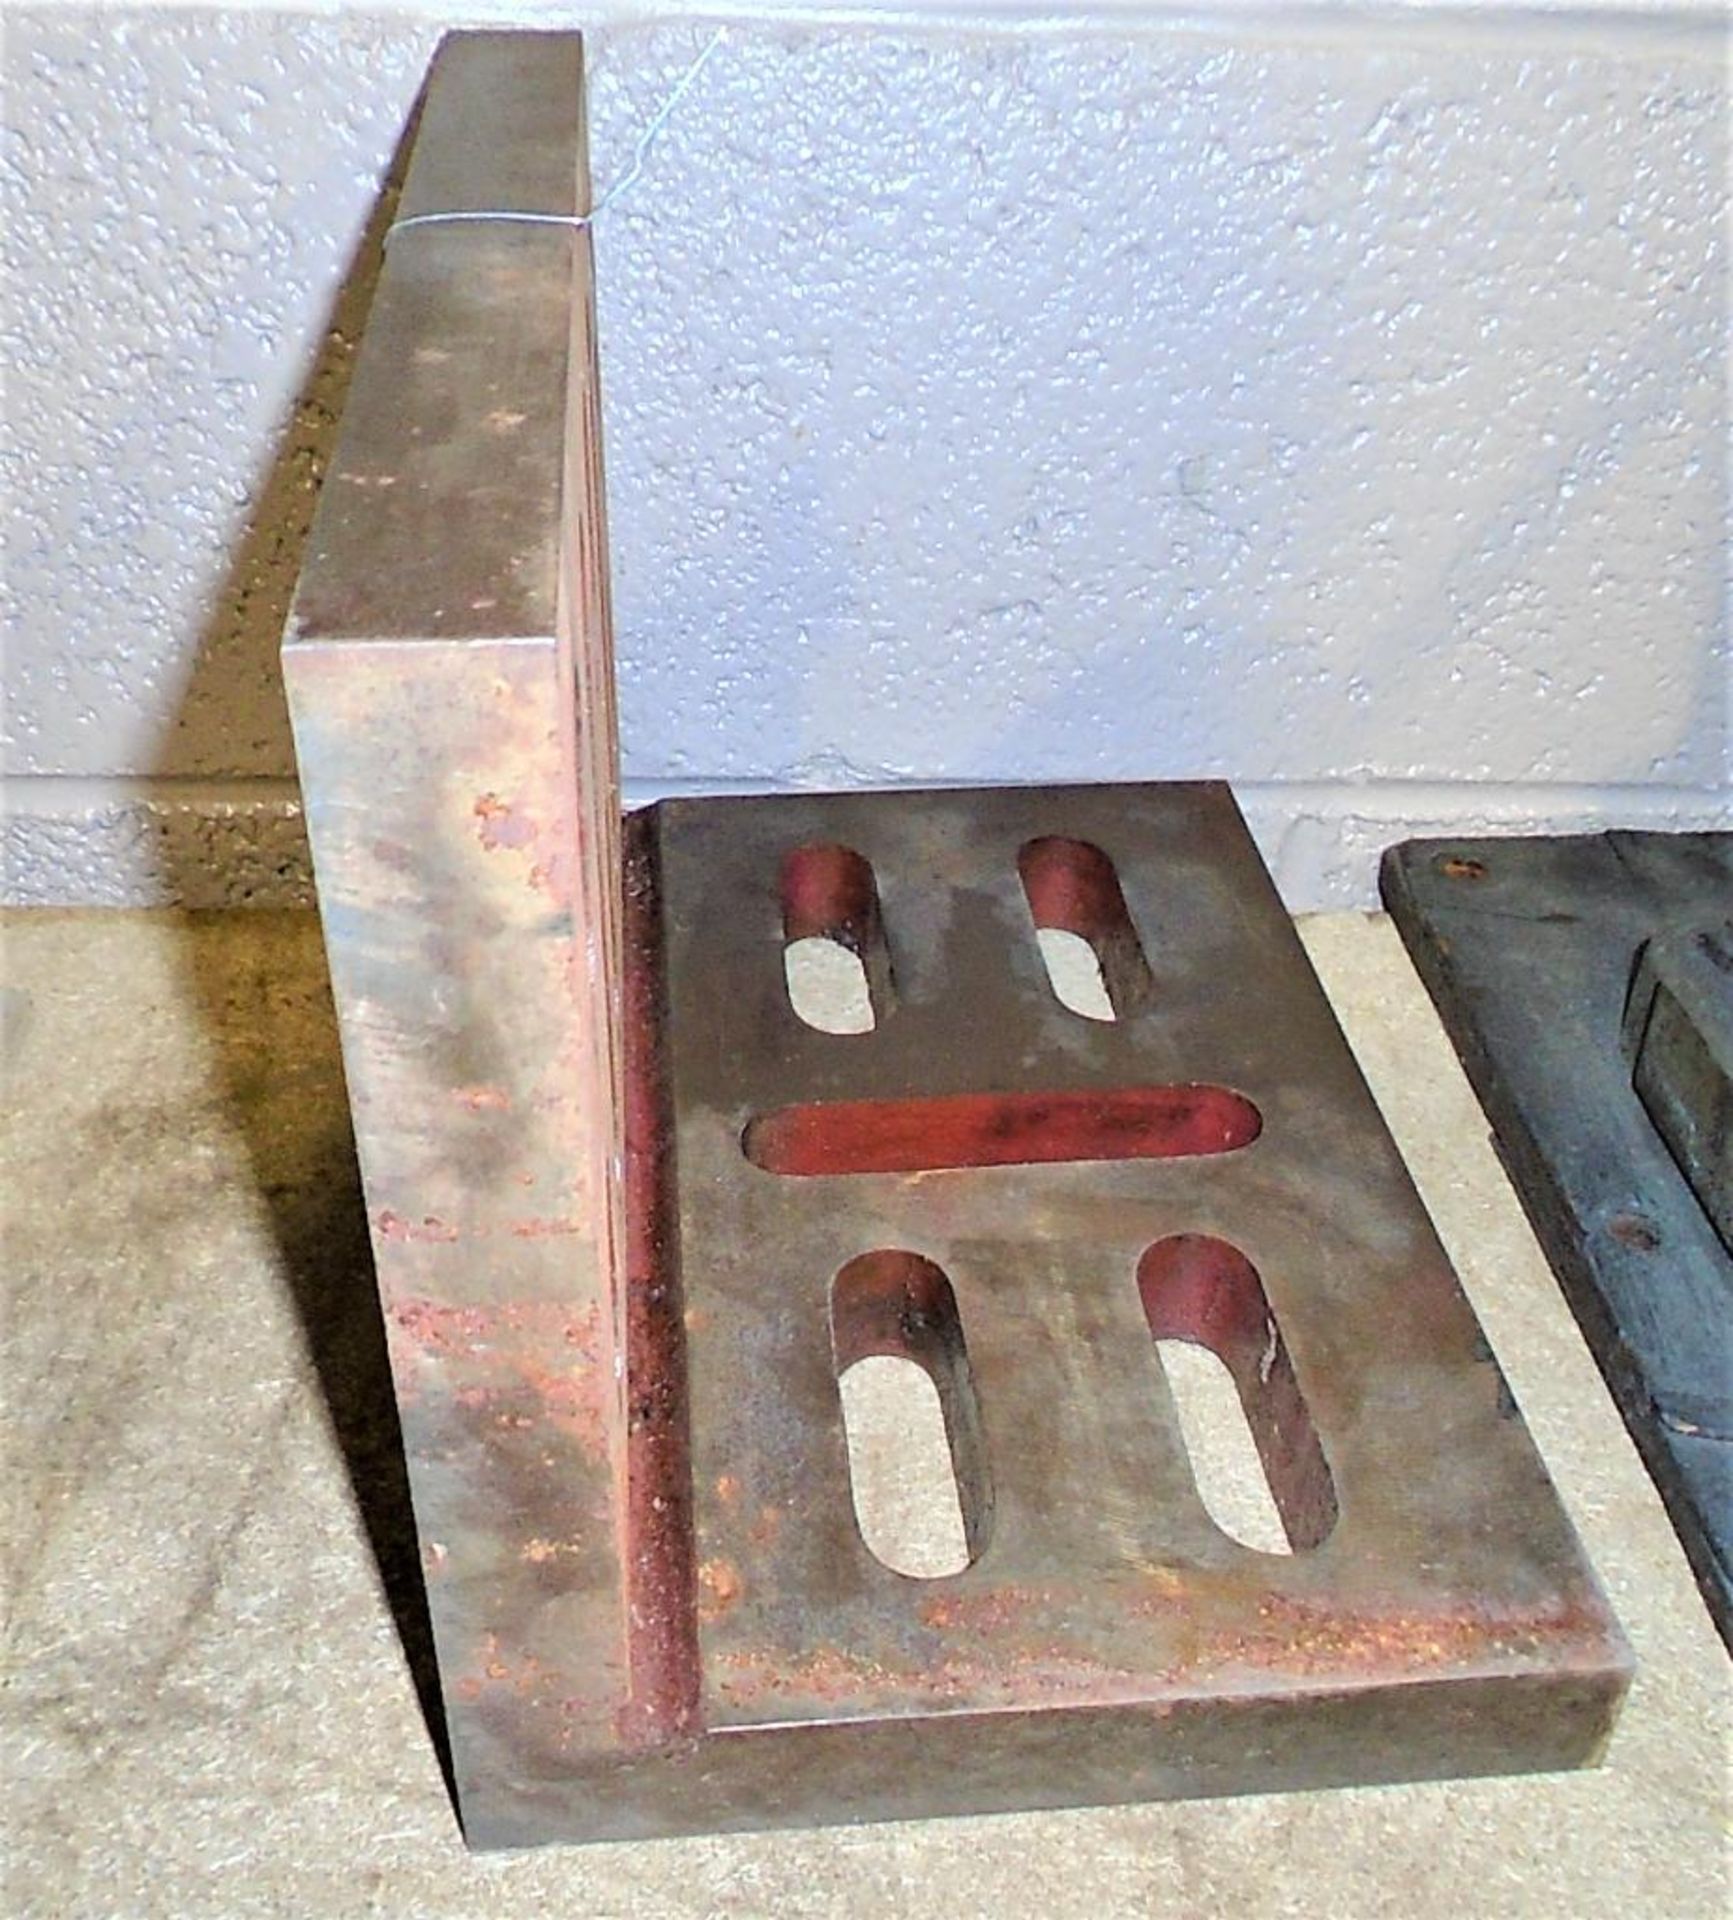 12"X9"X8" Slotted Angle Plate - Image 3 of 3